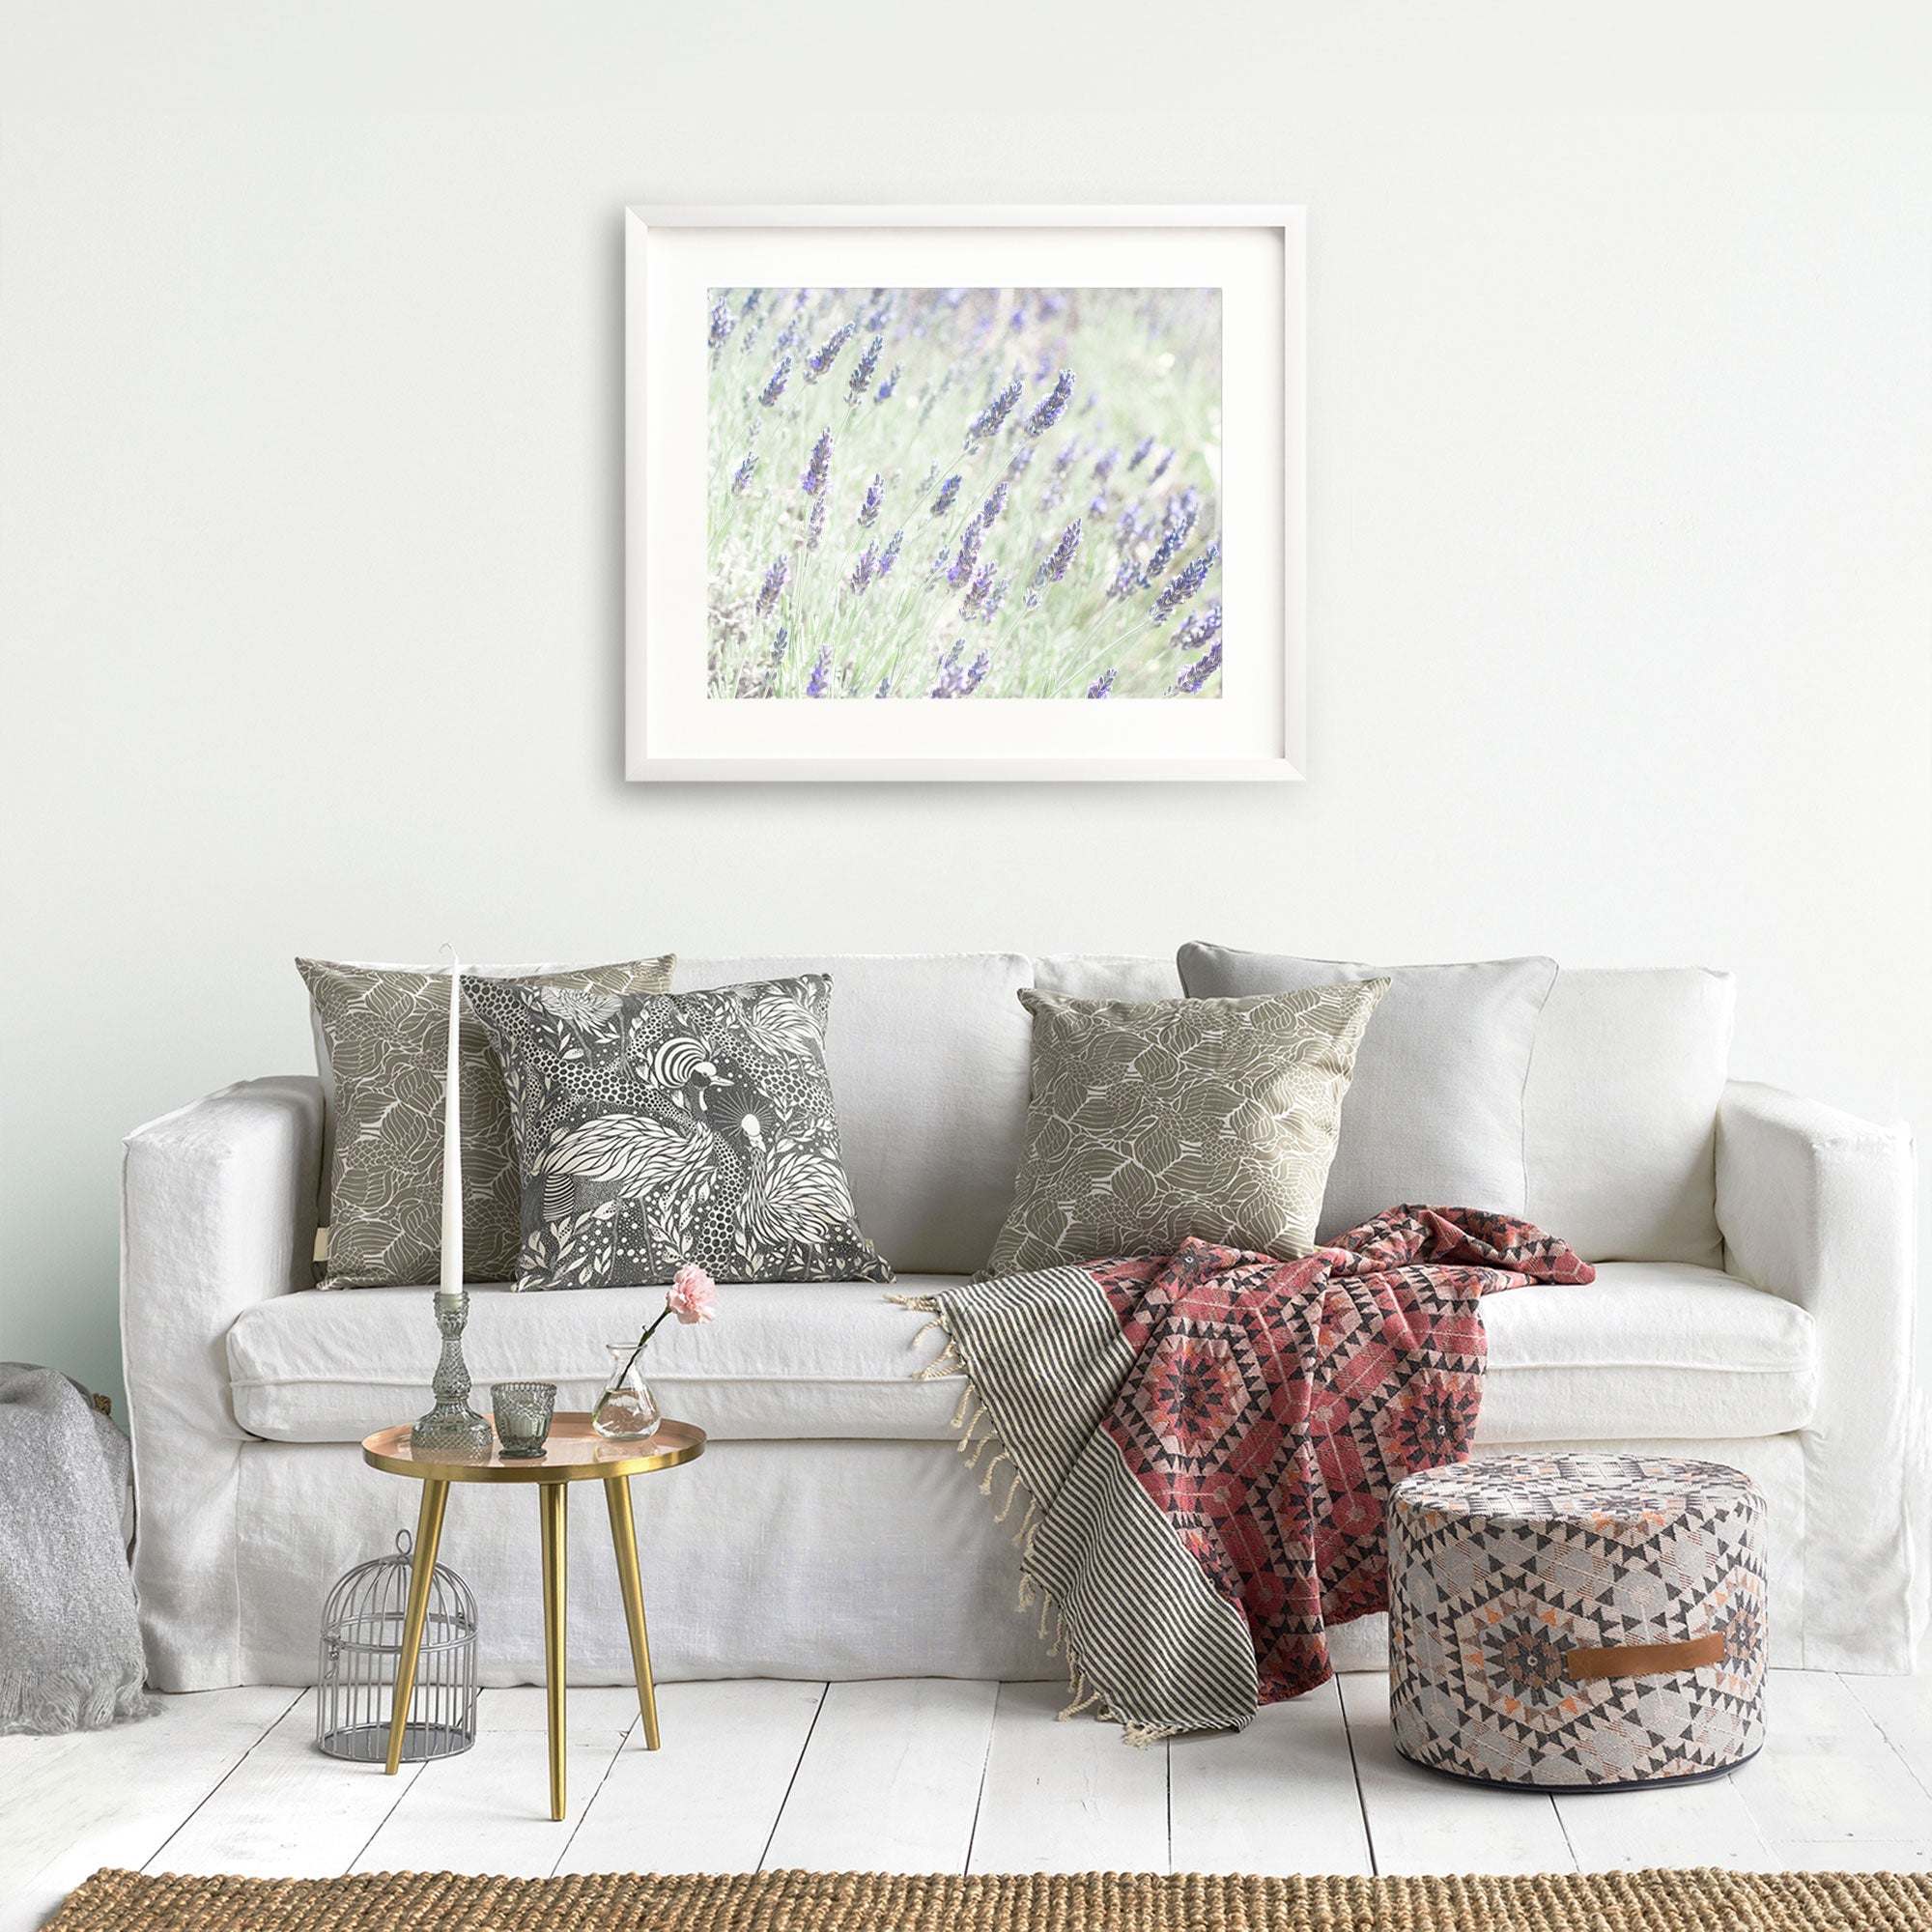 A cozy living room with a white sofa adorned with patterned pillows, a red patterned throw blanket, a small round gold table with decorative items, and Offley Green's 'Lavender for LaLa' Floral Purple Print above the sofa.